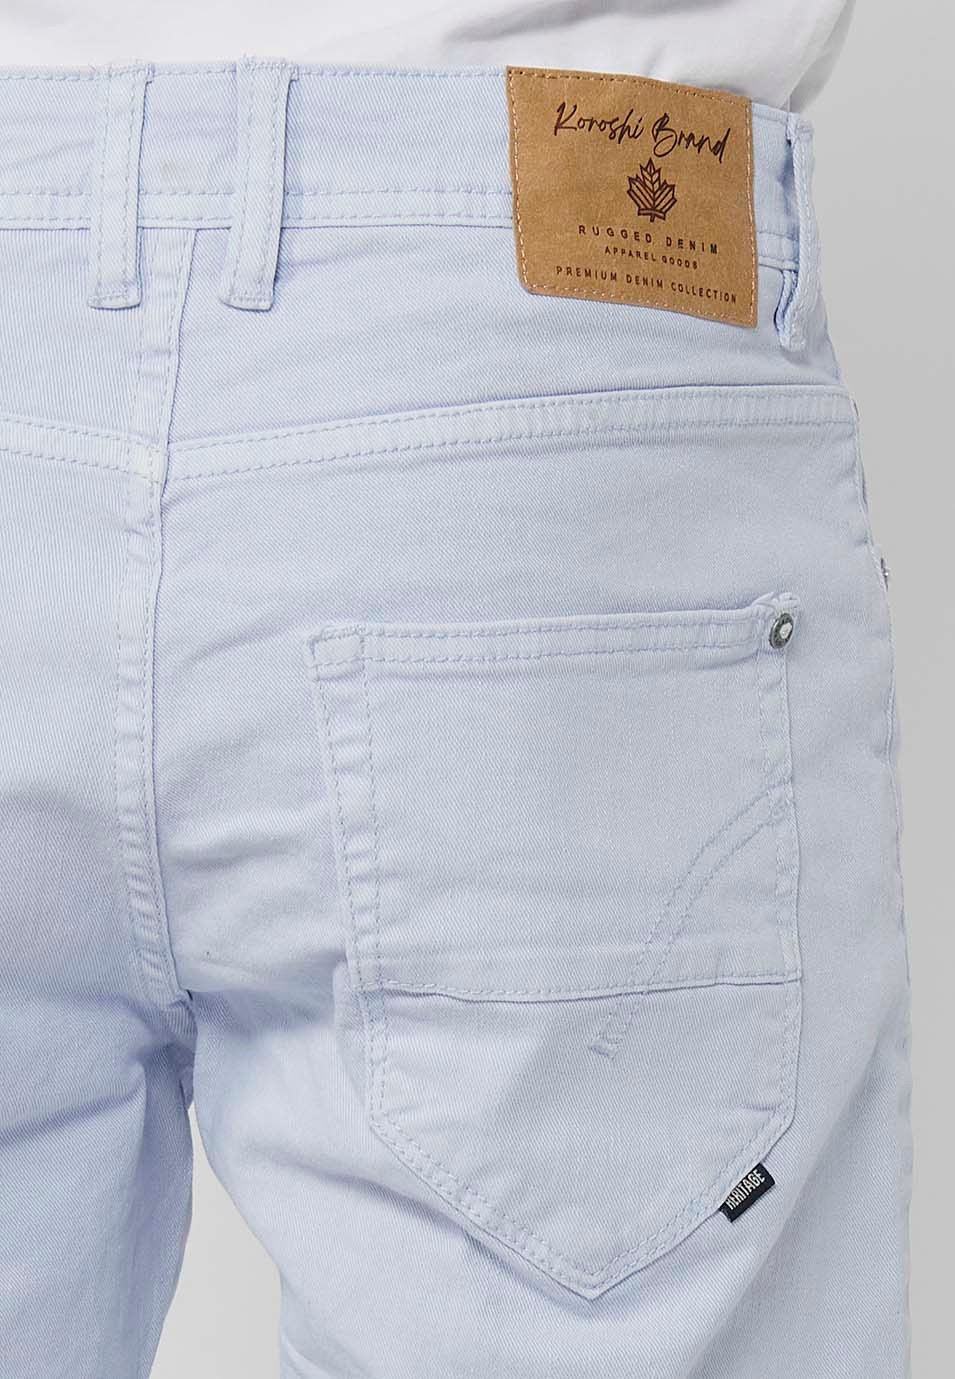 Denim Bermuda shorts with cuffed finish and front zipper and button closure. Five pockets, one blue color pocket for men 9